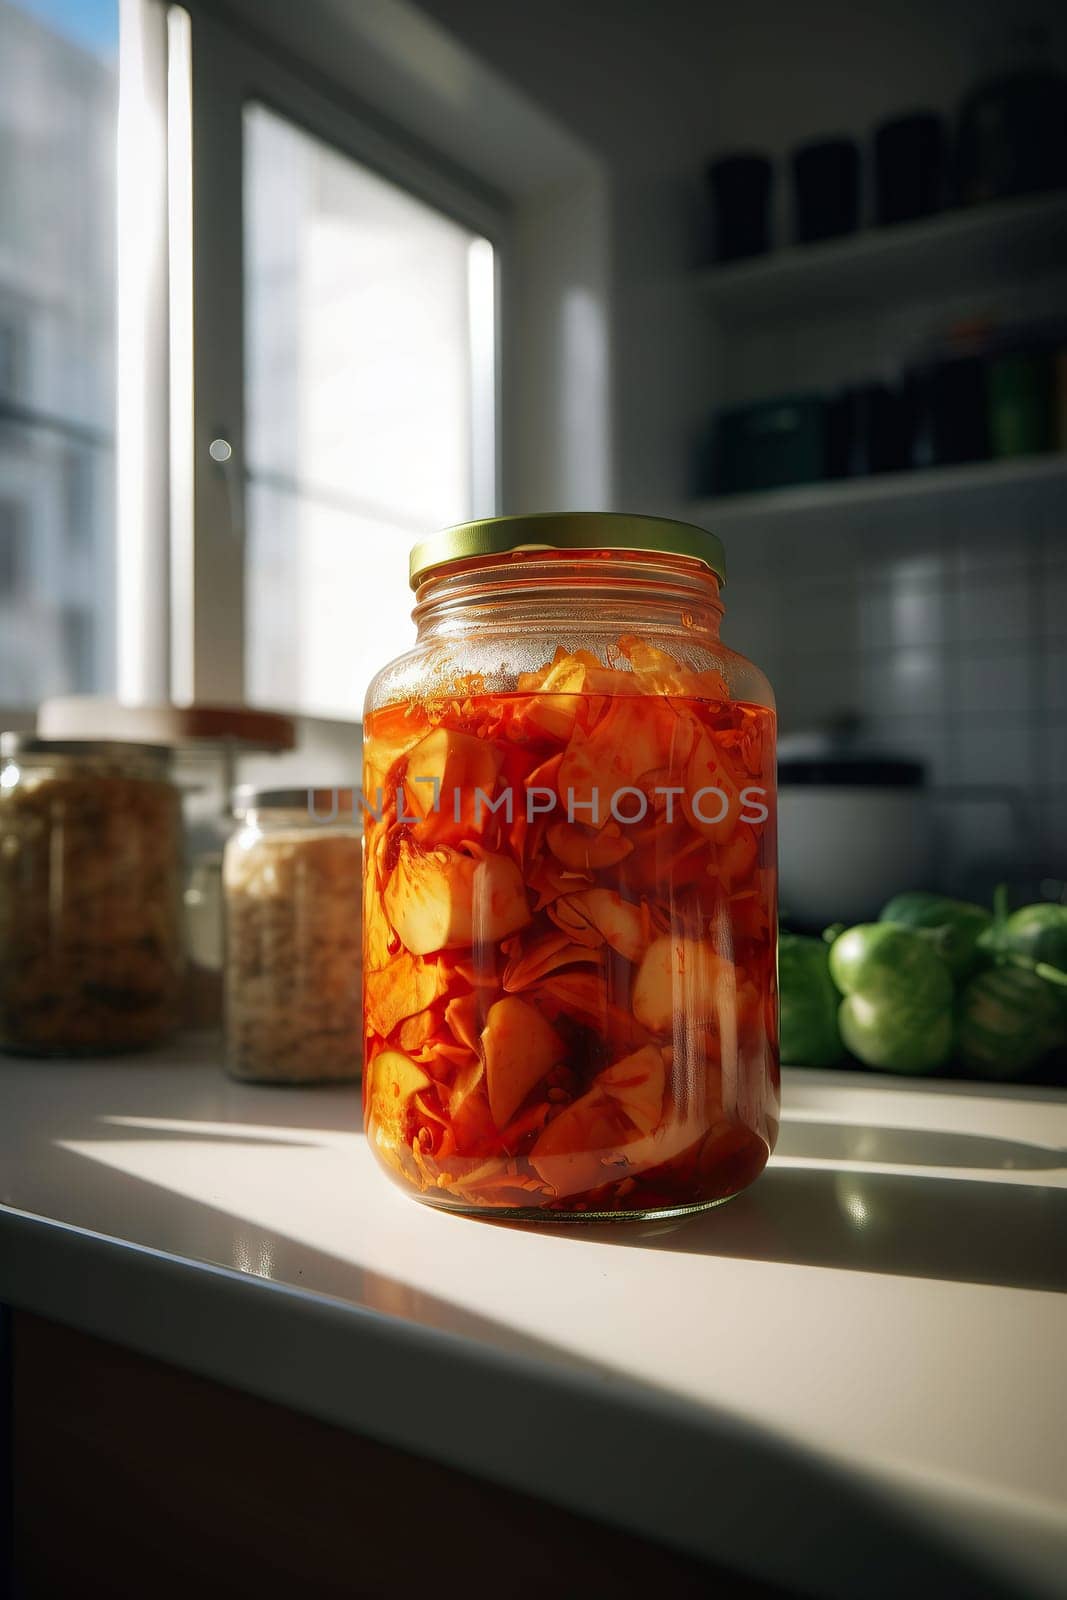 Homemade organic traditional Korean kimchi kale salad in a glass jar on the table. fermented vegetarian, canned food. by Ramanouskaya